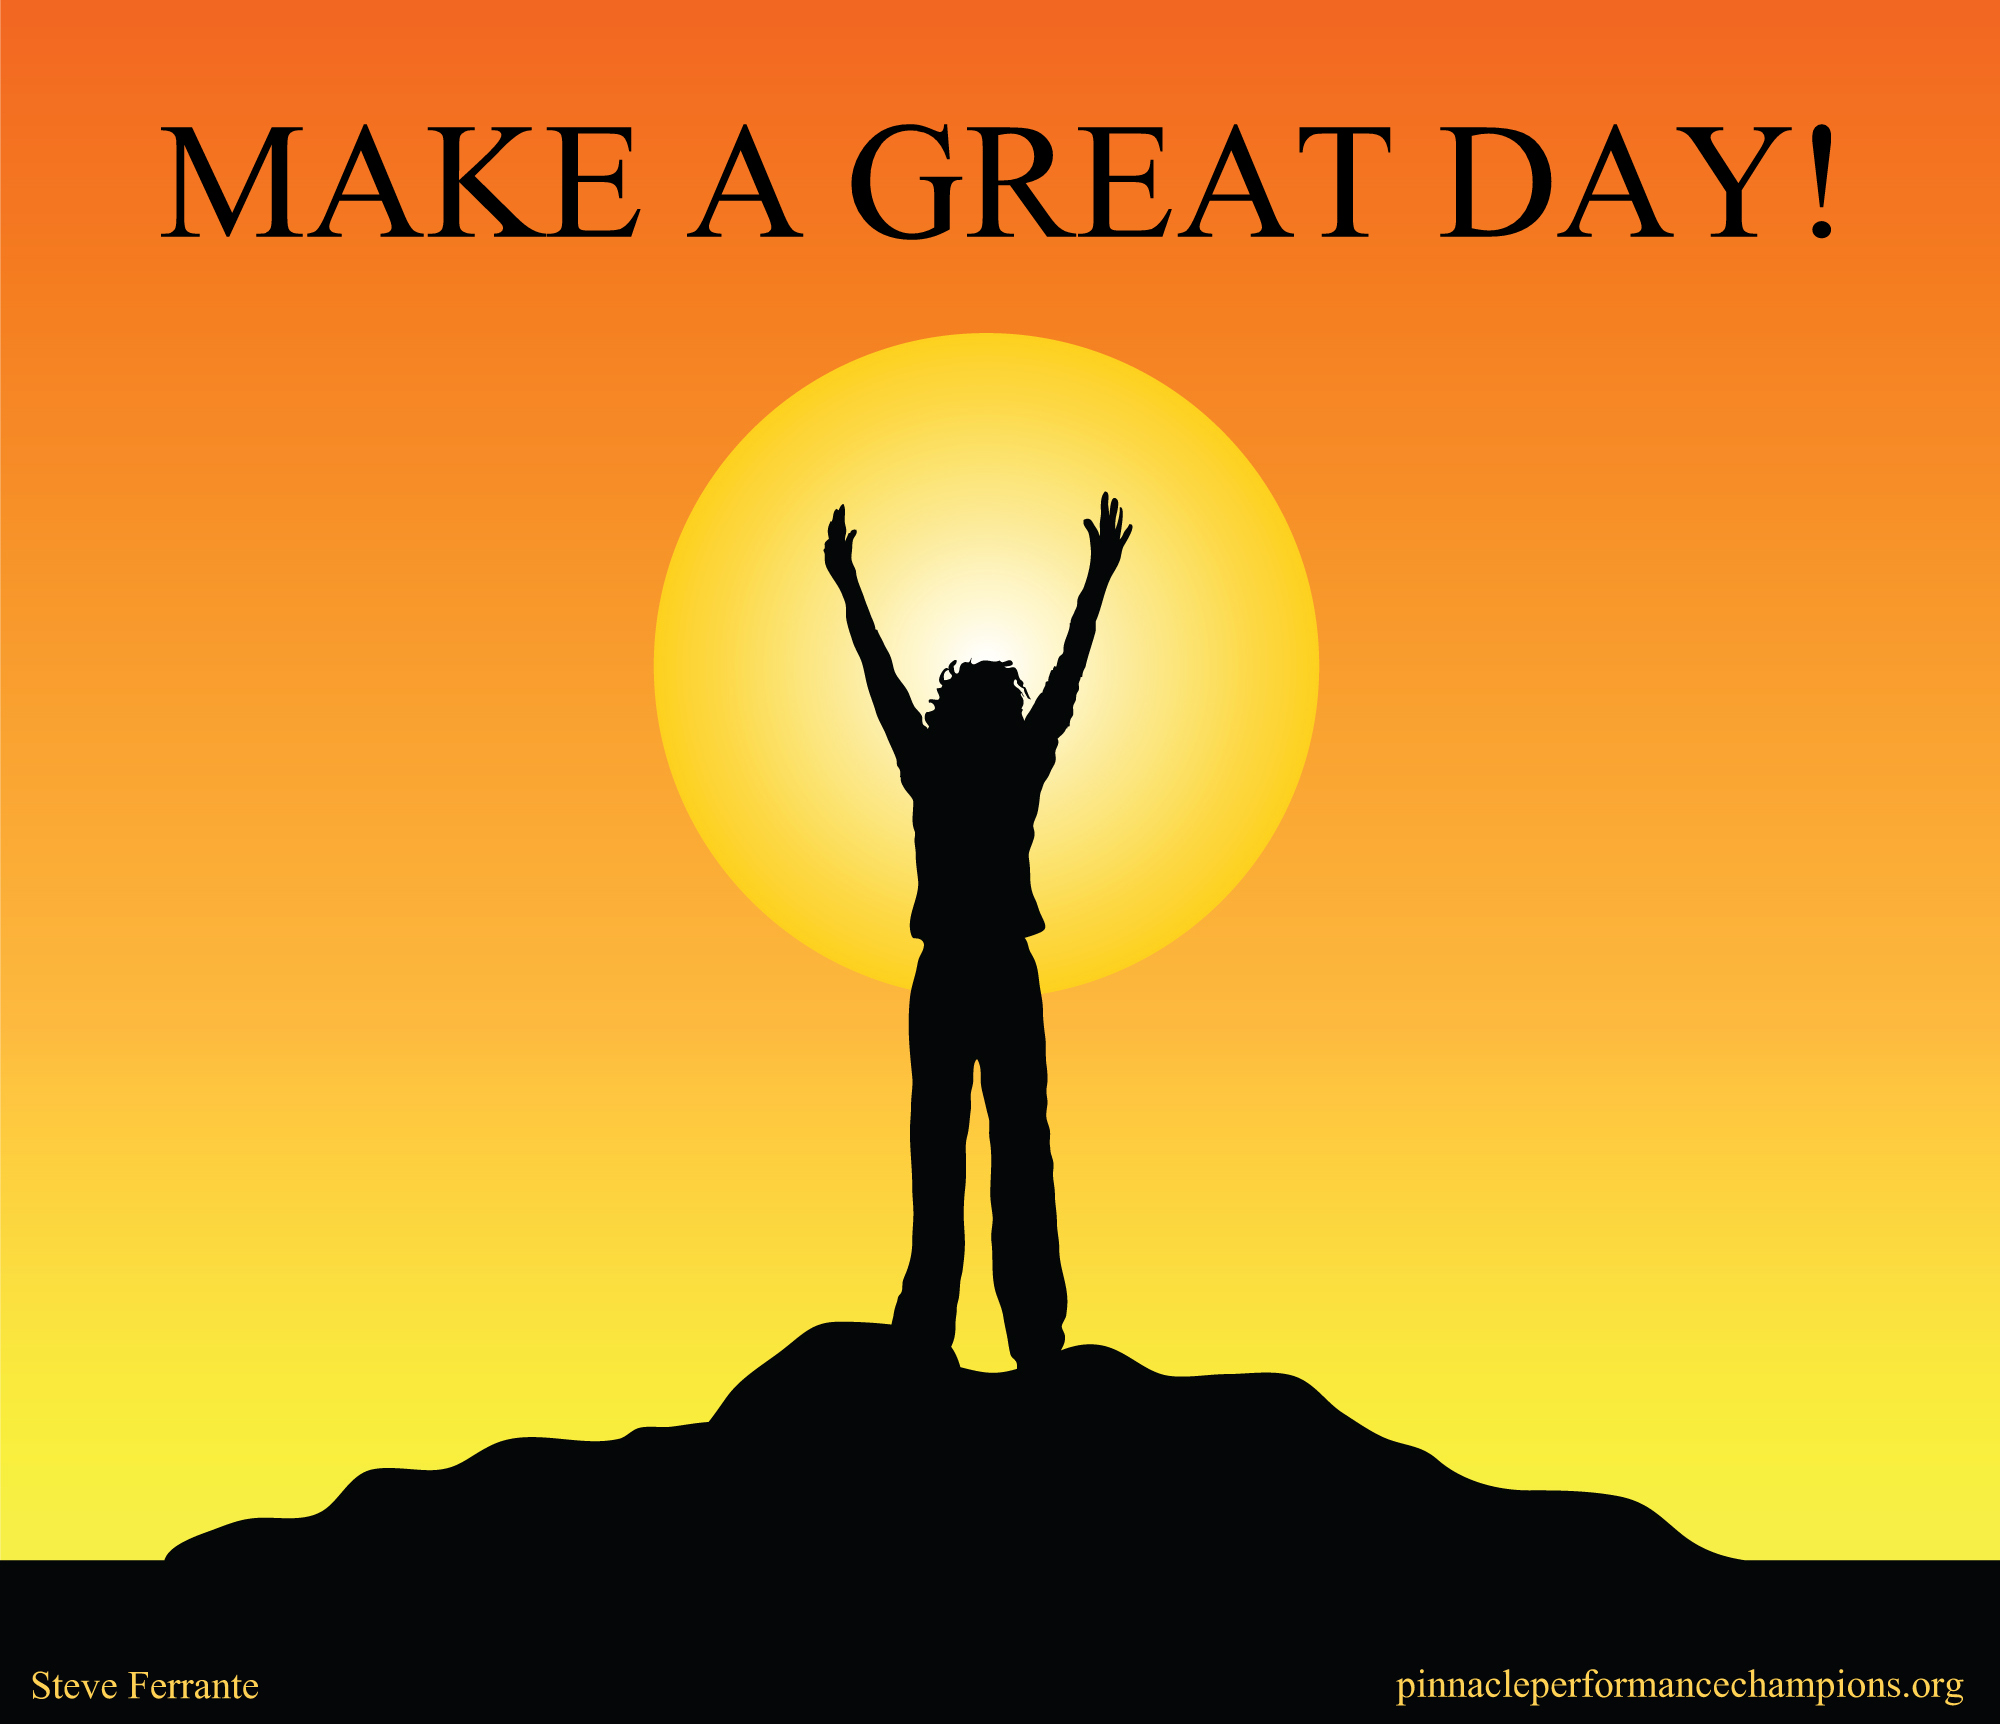 Make a Great Day!